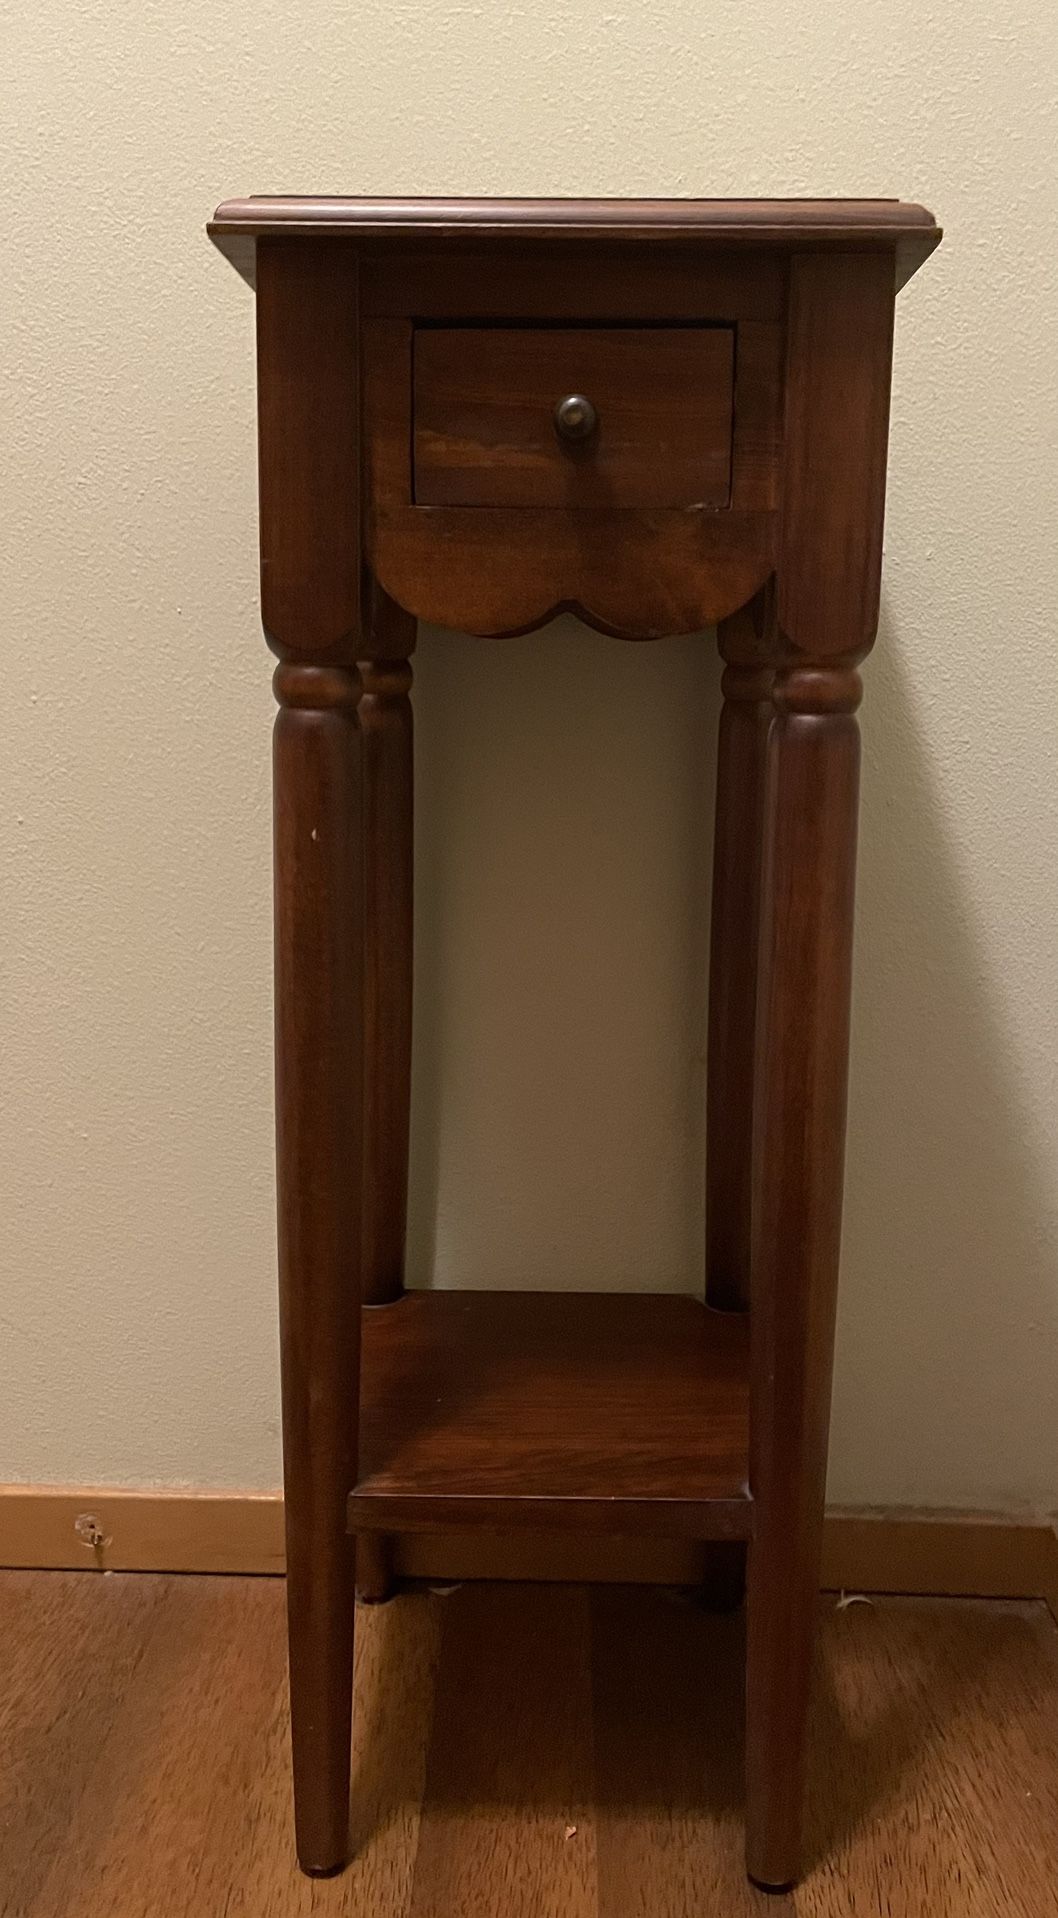 Decorative Table with Small Drawer